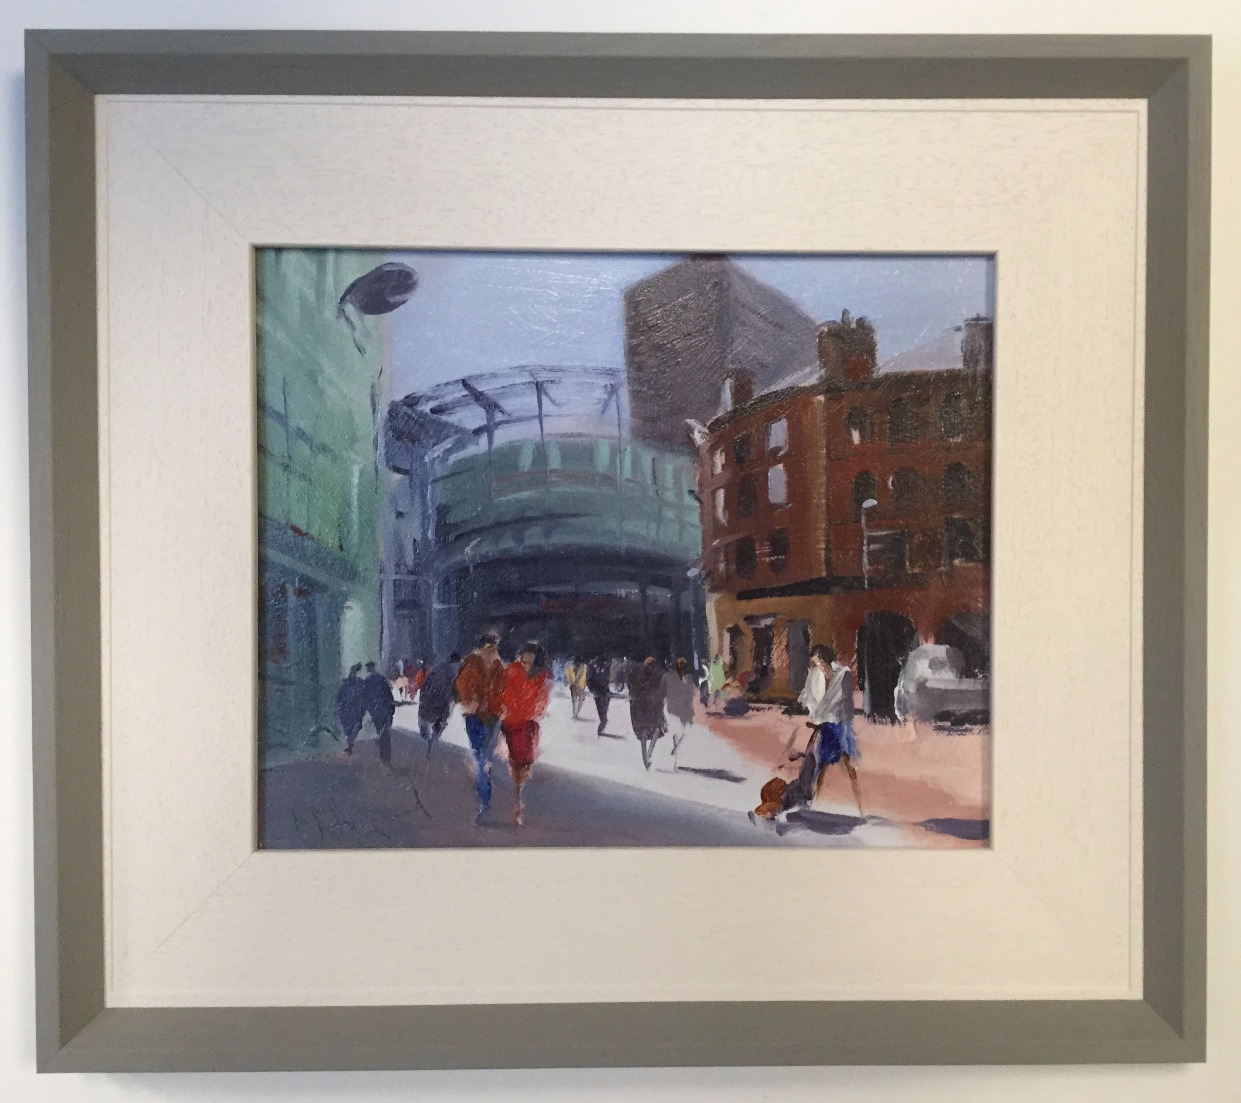 Urbis Triangle (Manchester) by Trevor Lingard, Manchester | Local